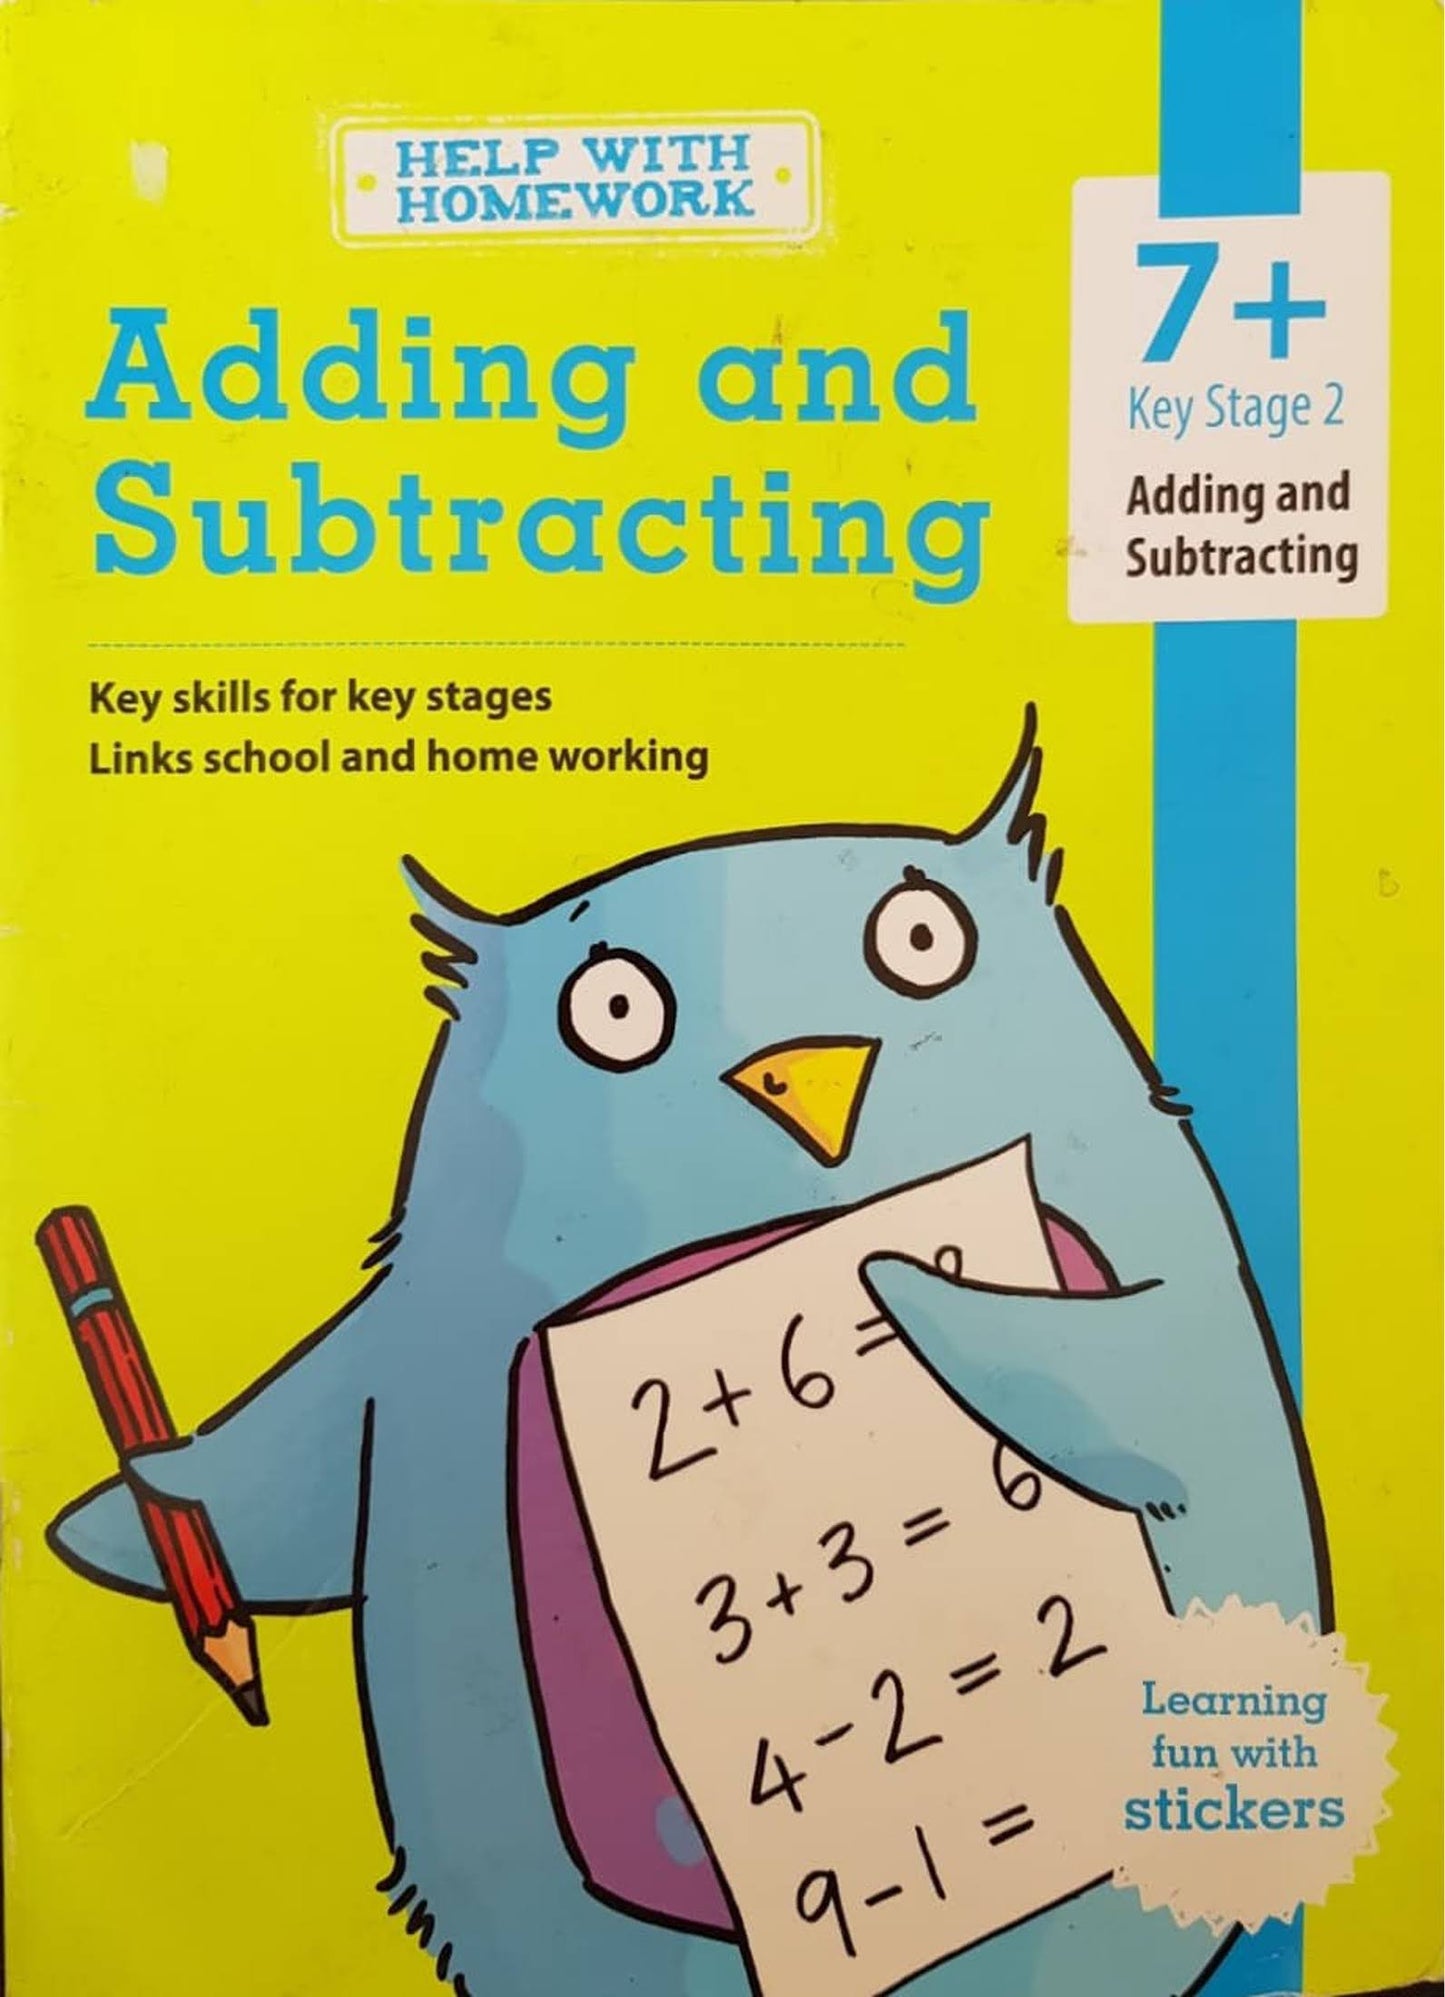 Adding and Subtracting Stage 2 Very Good, 3+ Yrs Recuddles.ch  (6541798932665)